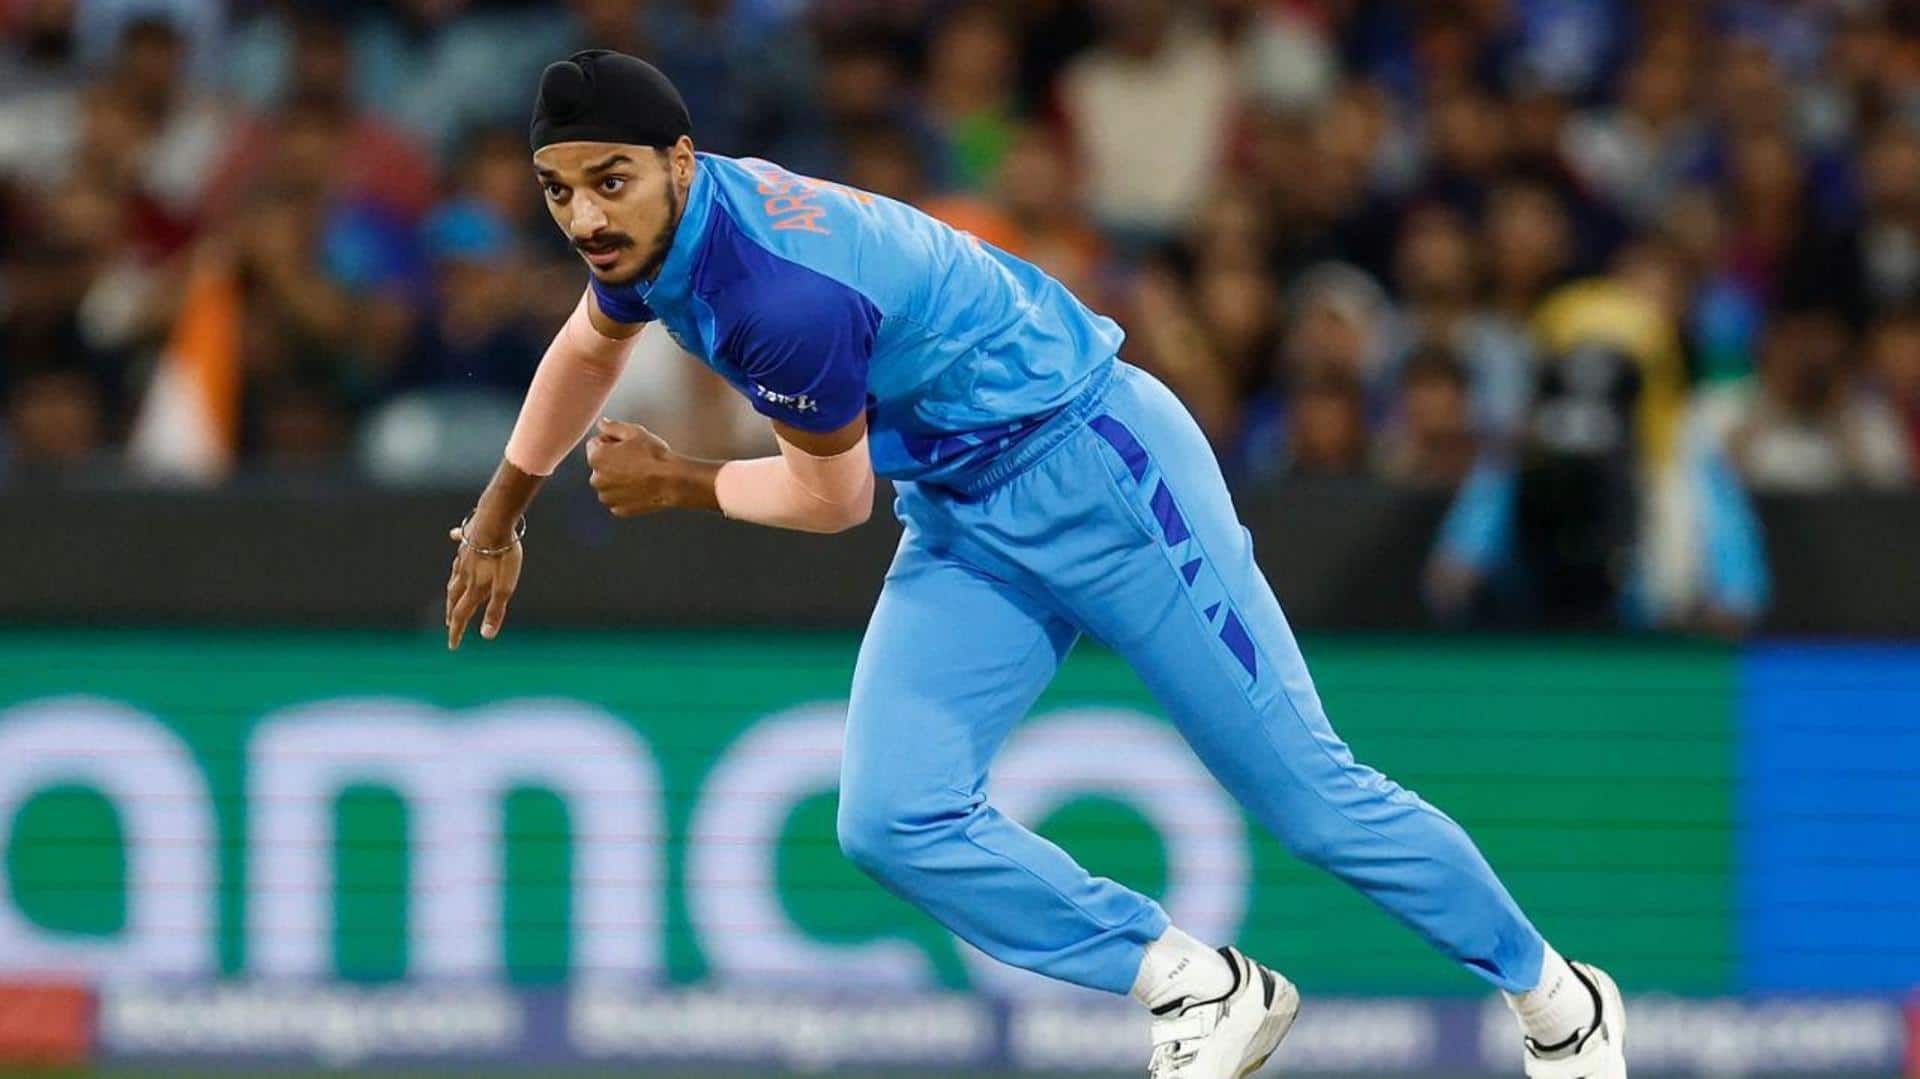 Decoding Arshdeep Singh's struggles in final two overs (T20Is)